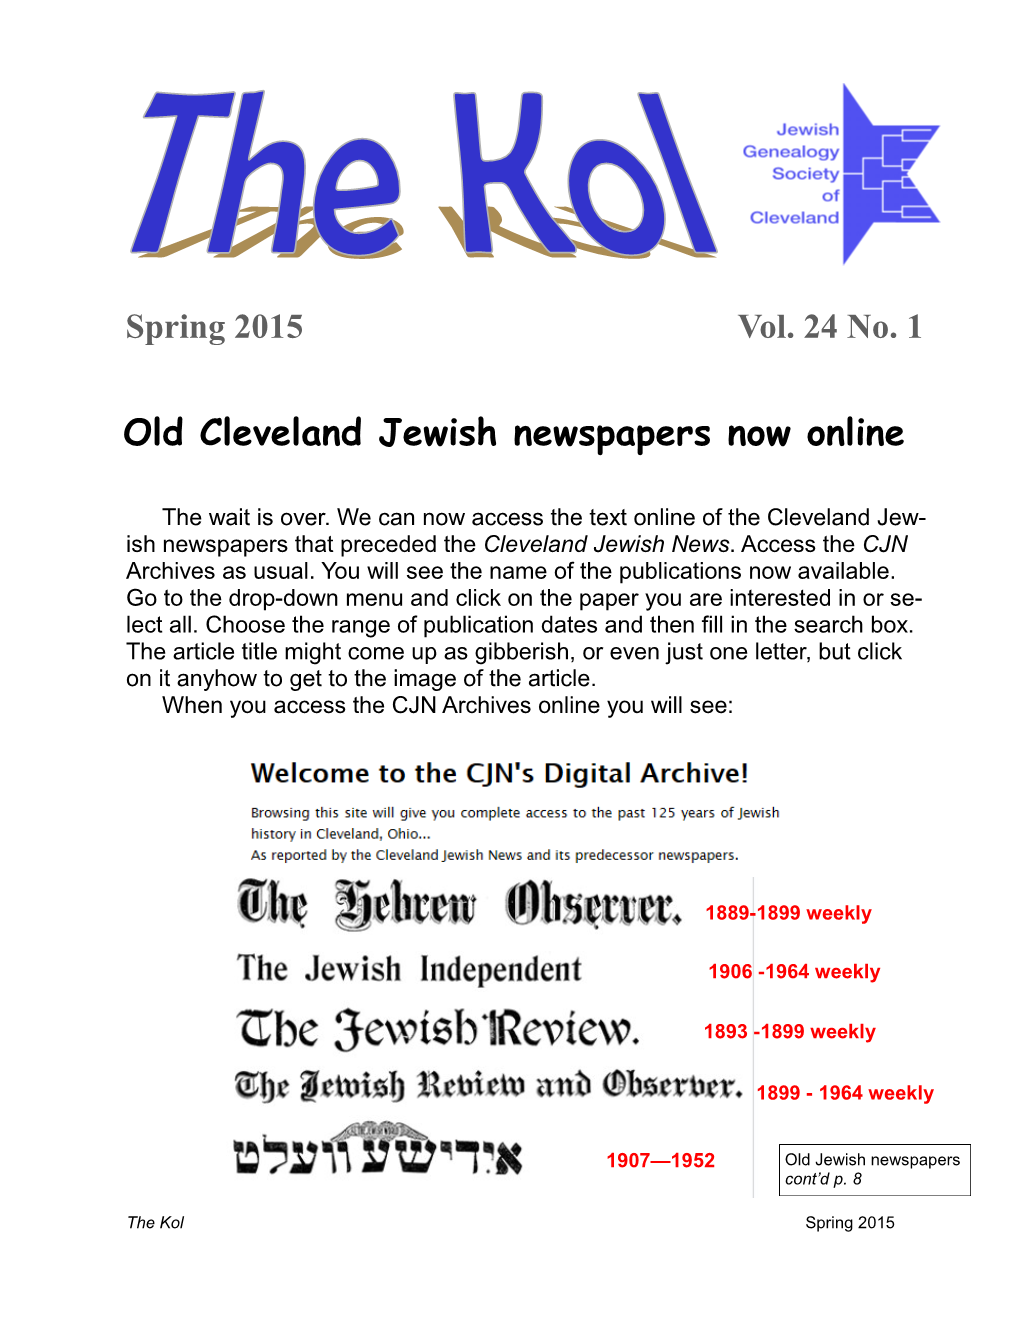 Old Cleveland Jewish Newspapers Now Online